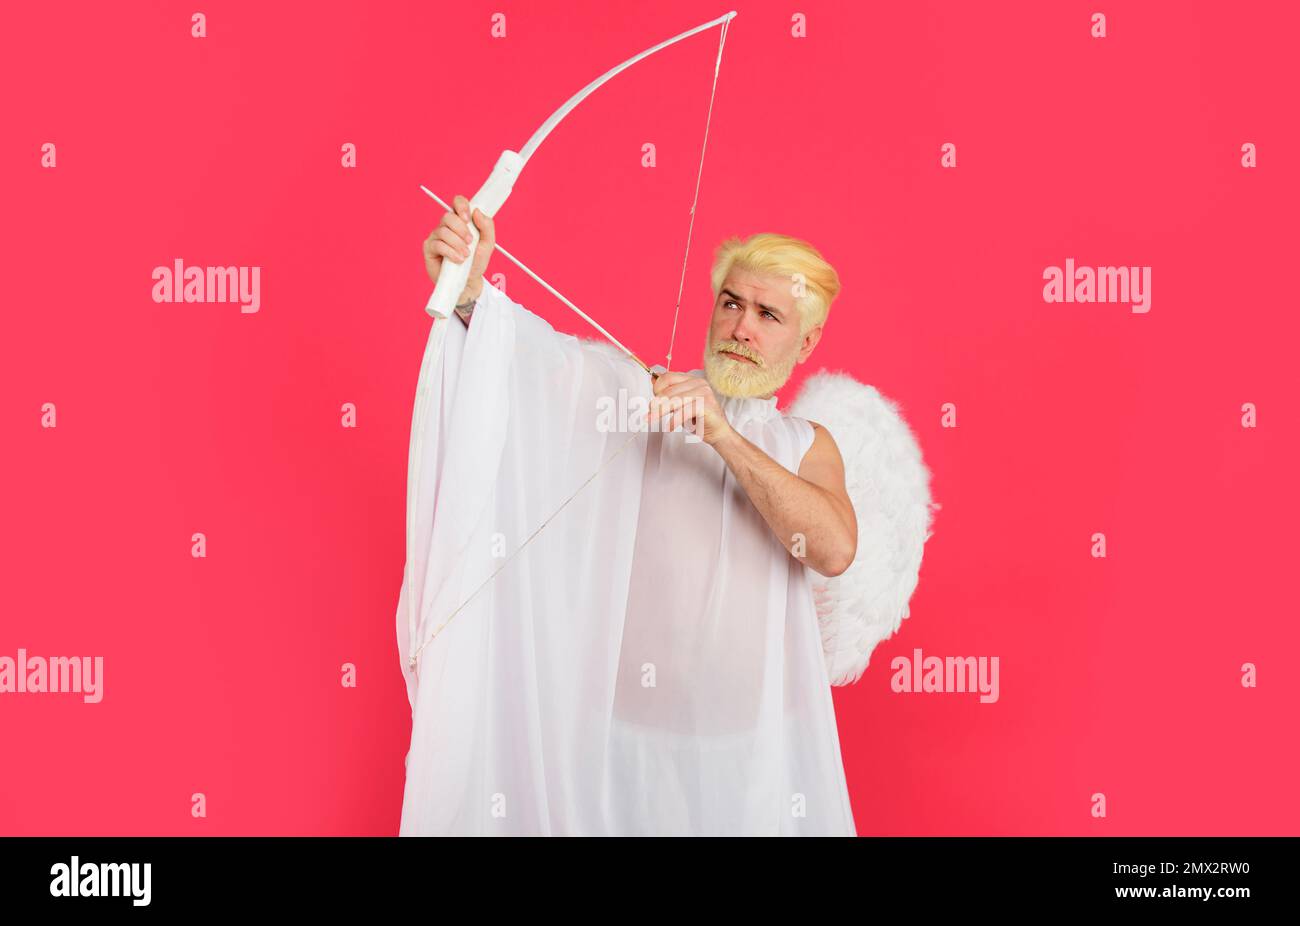 Valentines day angel. Handsome cupid aiming up with bow and arrow. God of love. February 14. Stock Photo